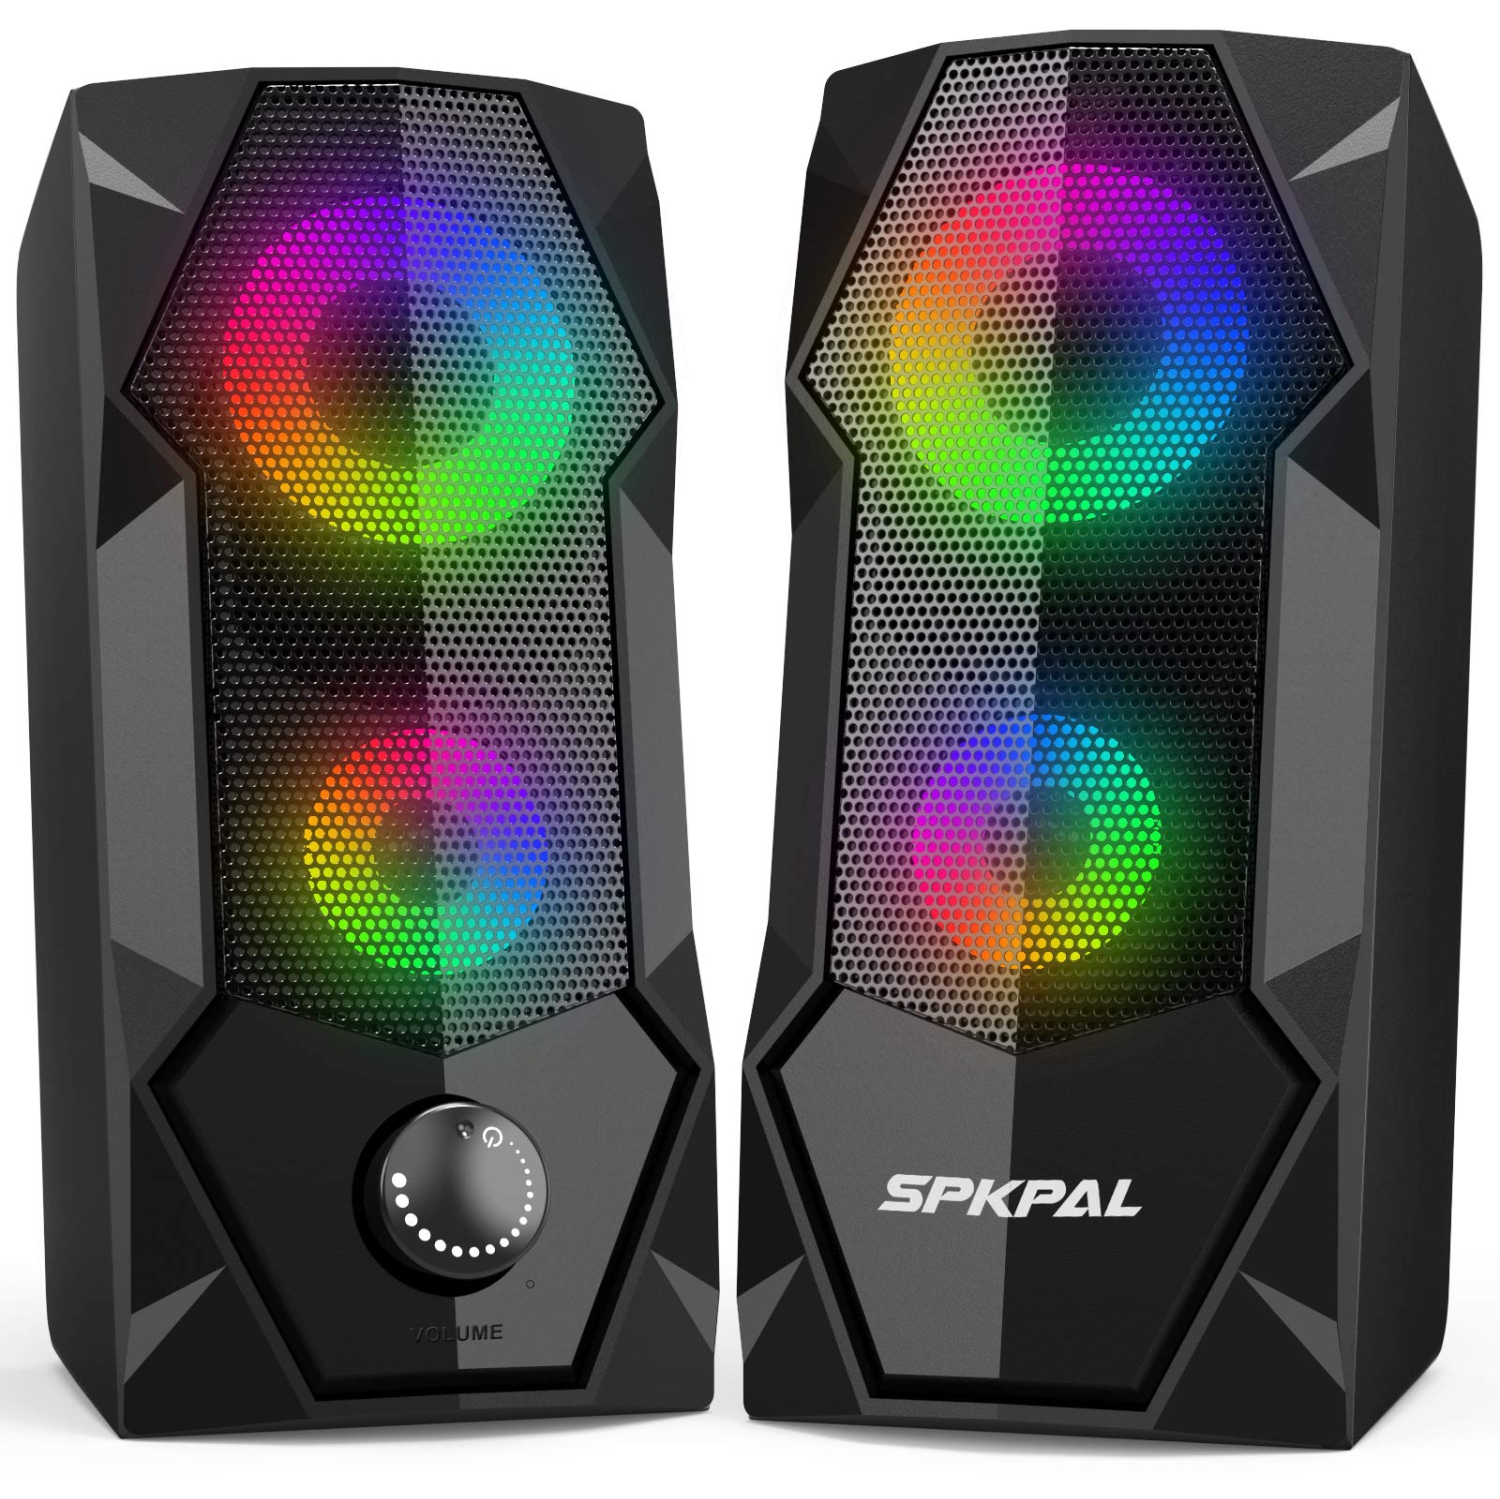 SPKPAL Computer Speakers,RGB Gaming PC Speaker,2.0 Wired USB-Powered Stereo Volume Control Multimedia Speakers for Laptop De